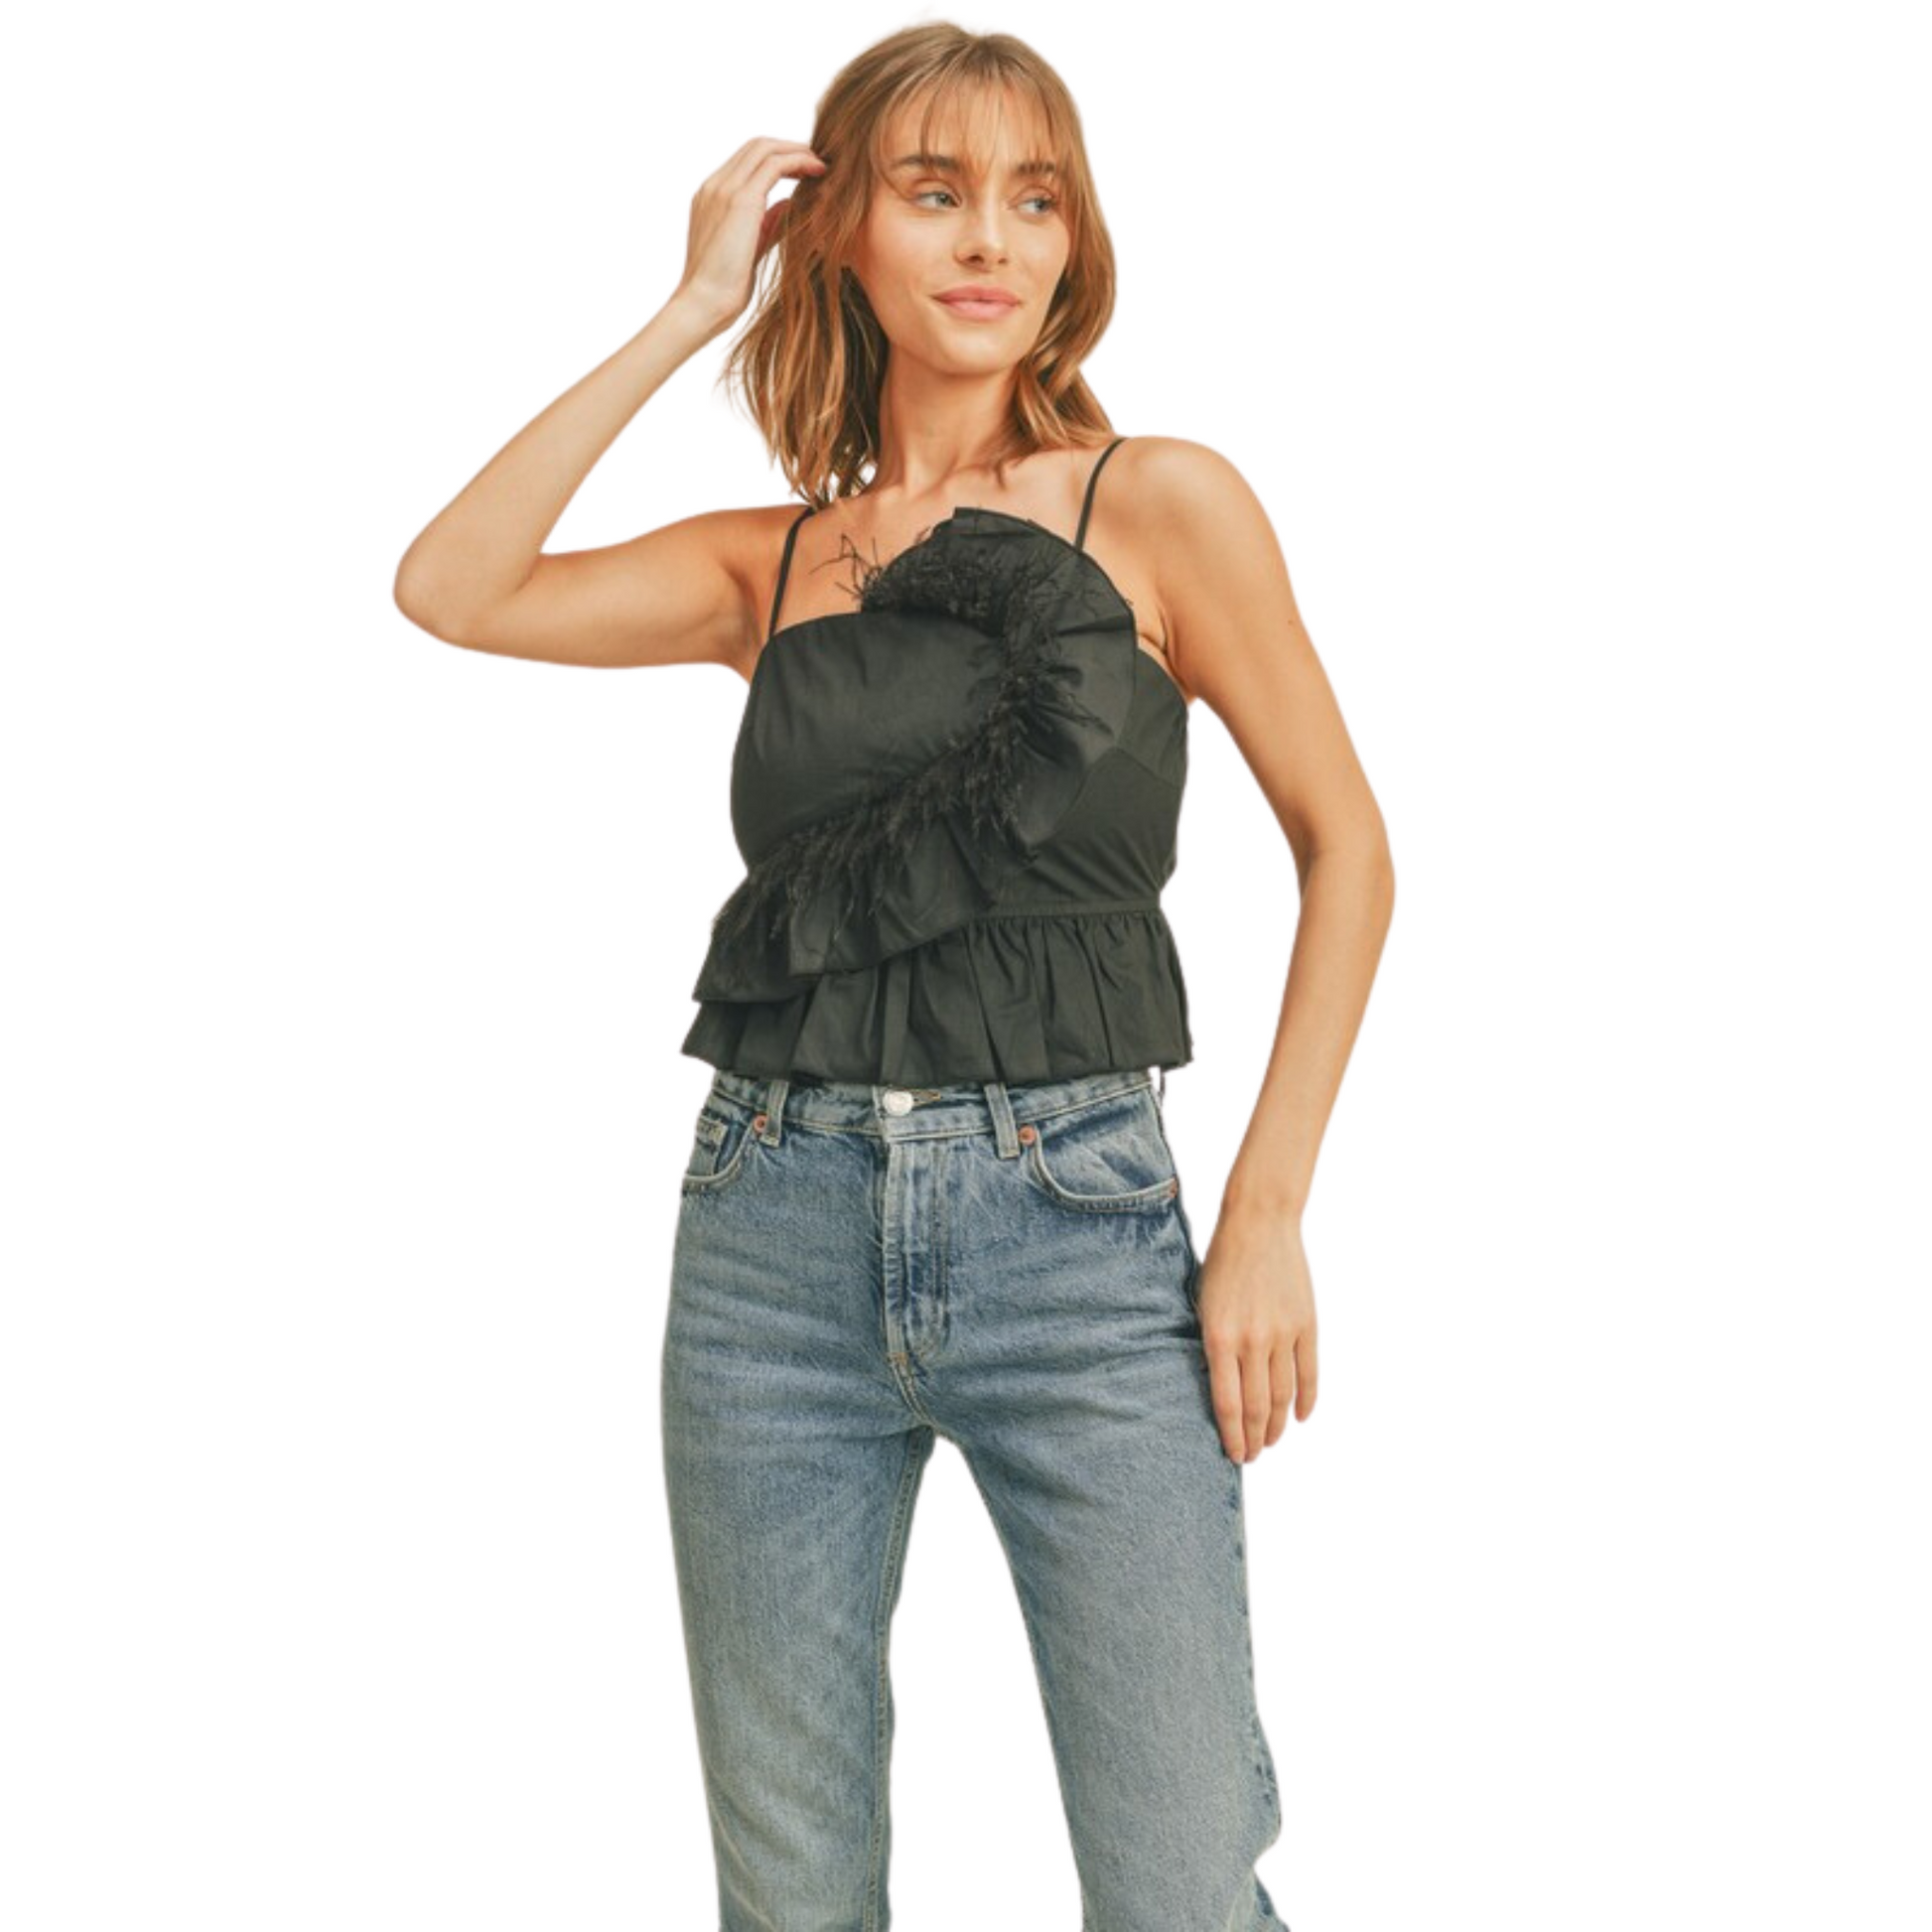 Look beautiful in our Feather Trim Cami Top. This elegant top is designed with ruffled and cropped details for a chic look. Soft spaghetti straps complete the design, making this the perfect addition to any wardrobe. The timeless black color makes it versatile and easy to pair with any outfit.